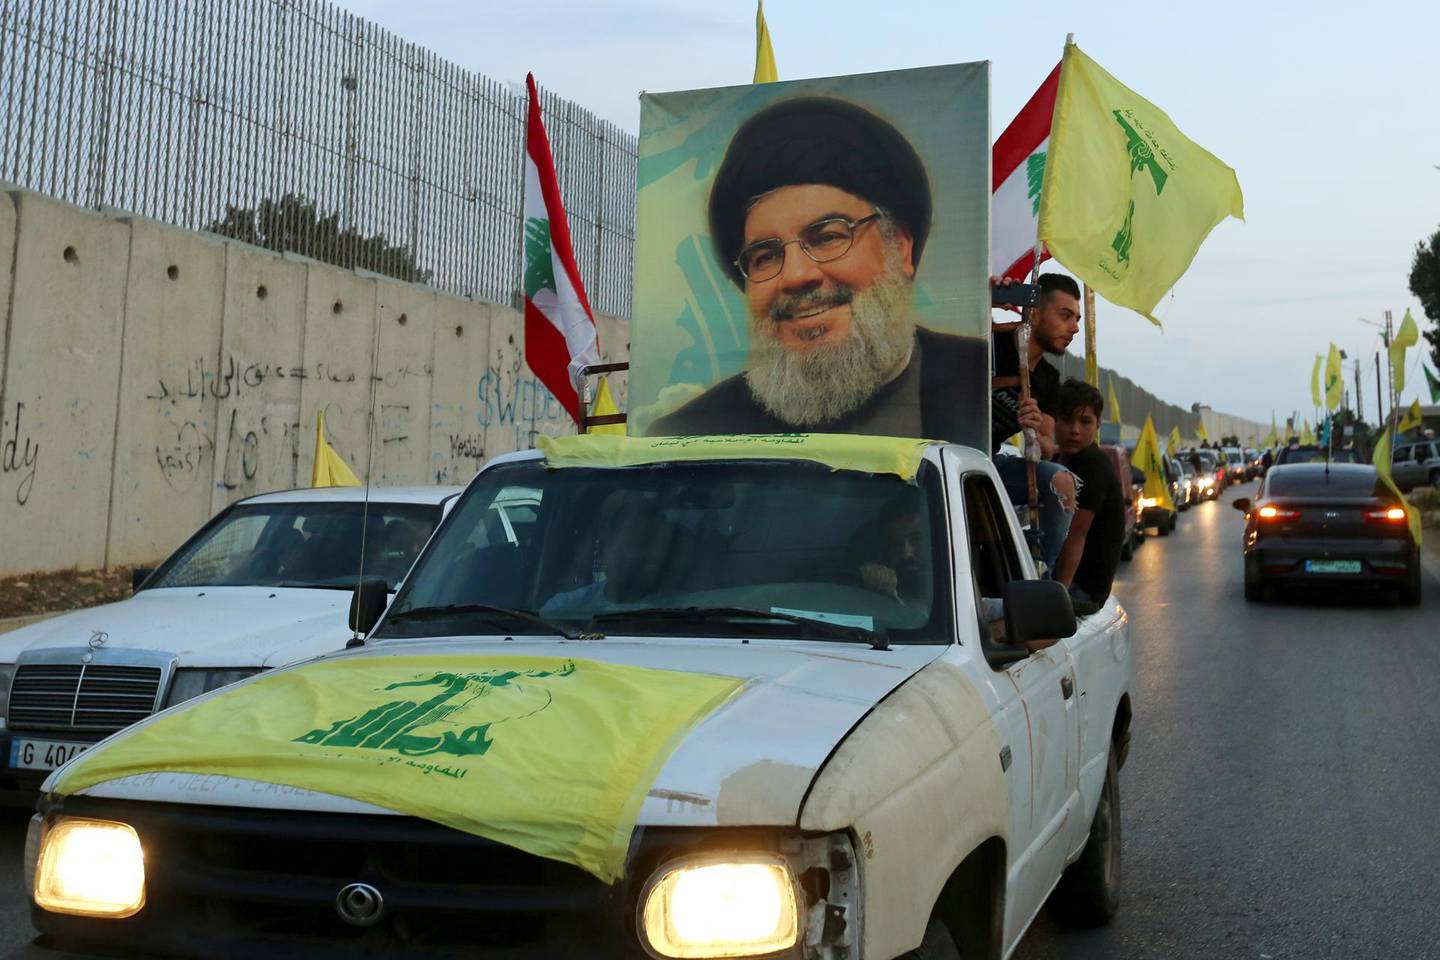 FILE PHOTO: Supporters of Lebanon's Hezbollah leader, Sayyed Hassan Nasrallah, ride in a vehicle decorated with Hezbollah and Lebanese flags and a picture of him, as part of a convoy in the southern village of Kfar Kila, Lebanon October 25, 2019. REUTERS/Aziz Taher/File Photo